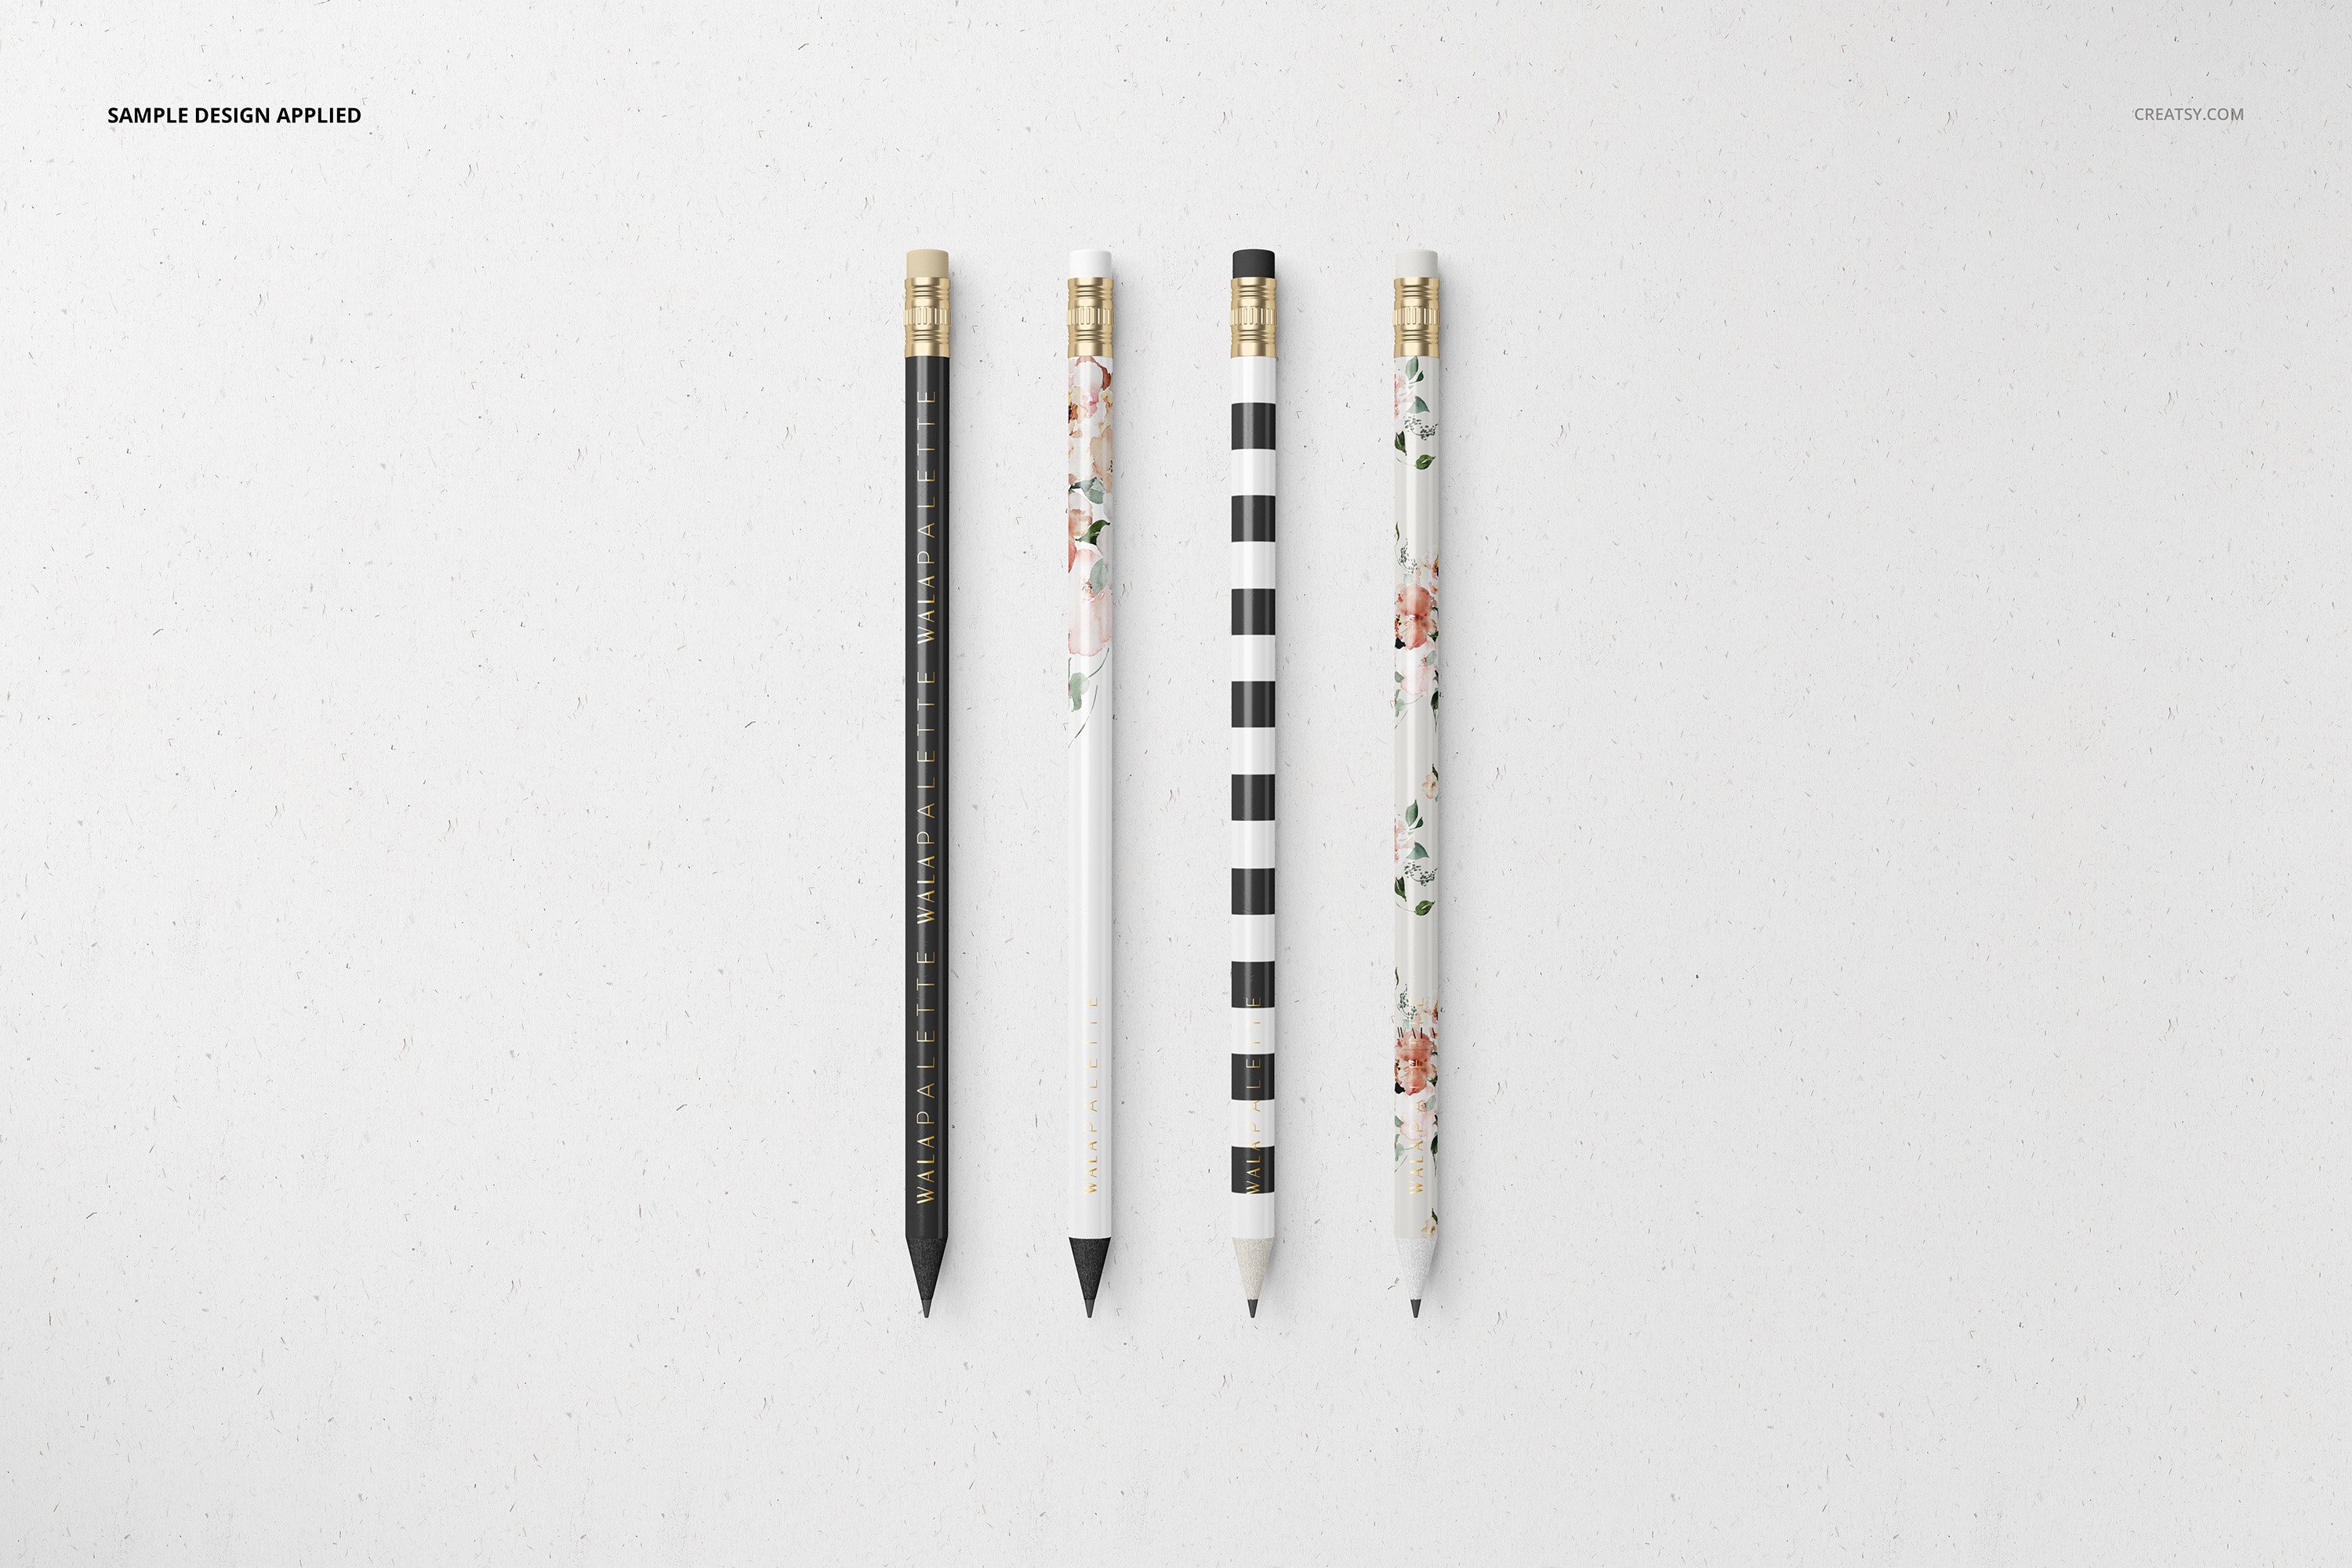 Stylish pens for this collection.